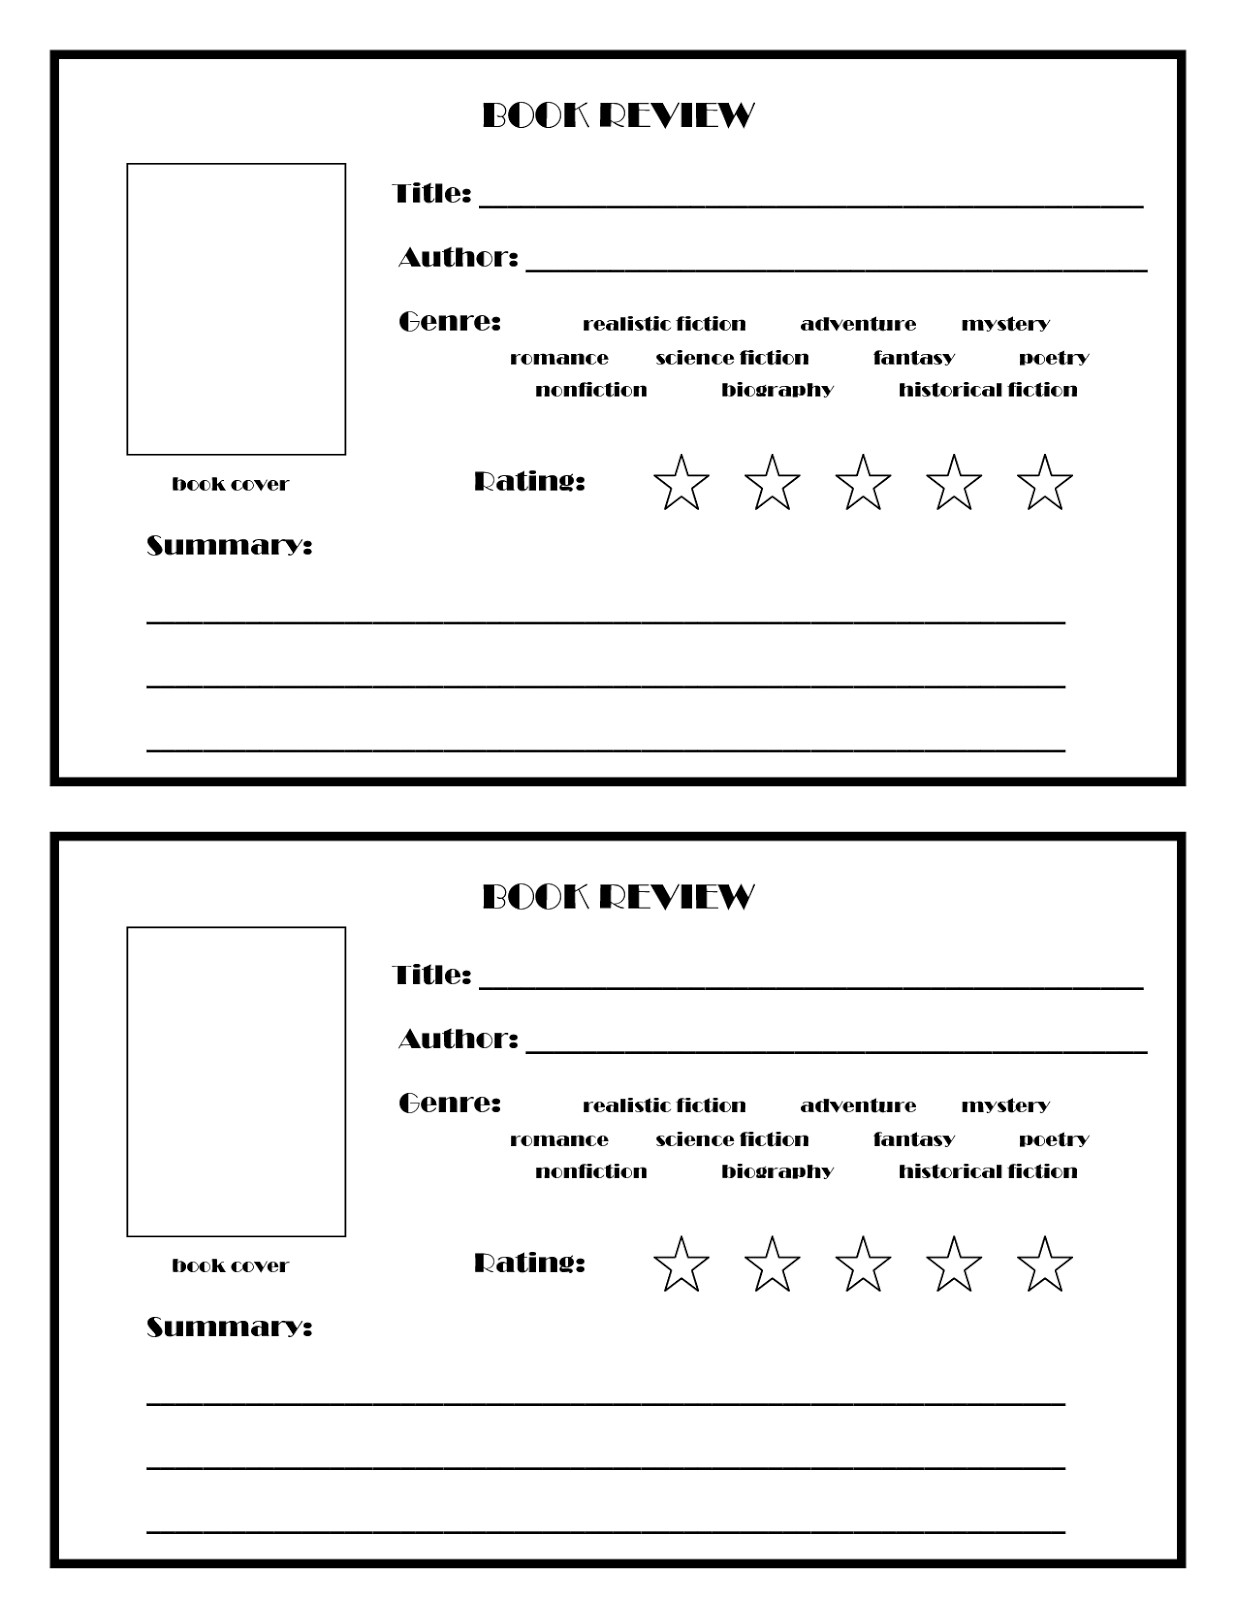 7 Best Images Of Book Review Printable Template Book Review Template Free Printable Book